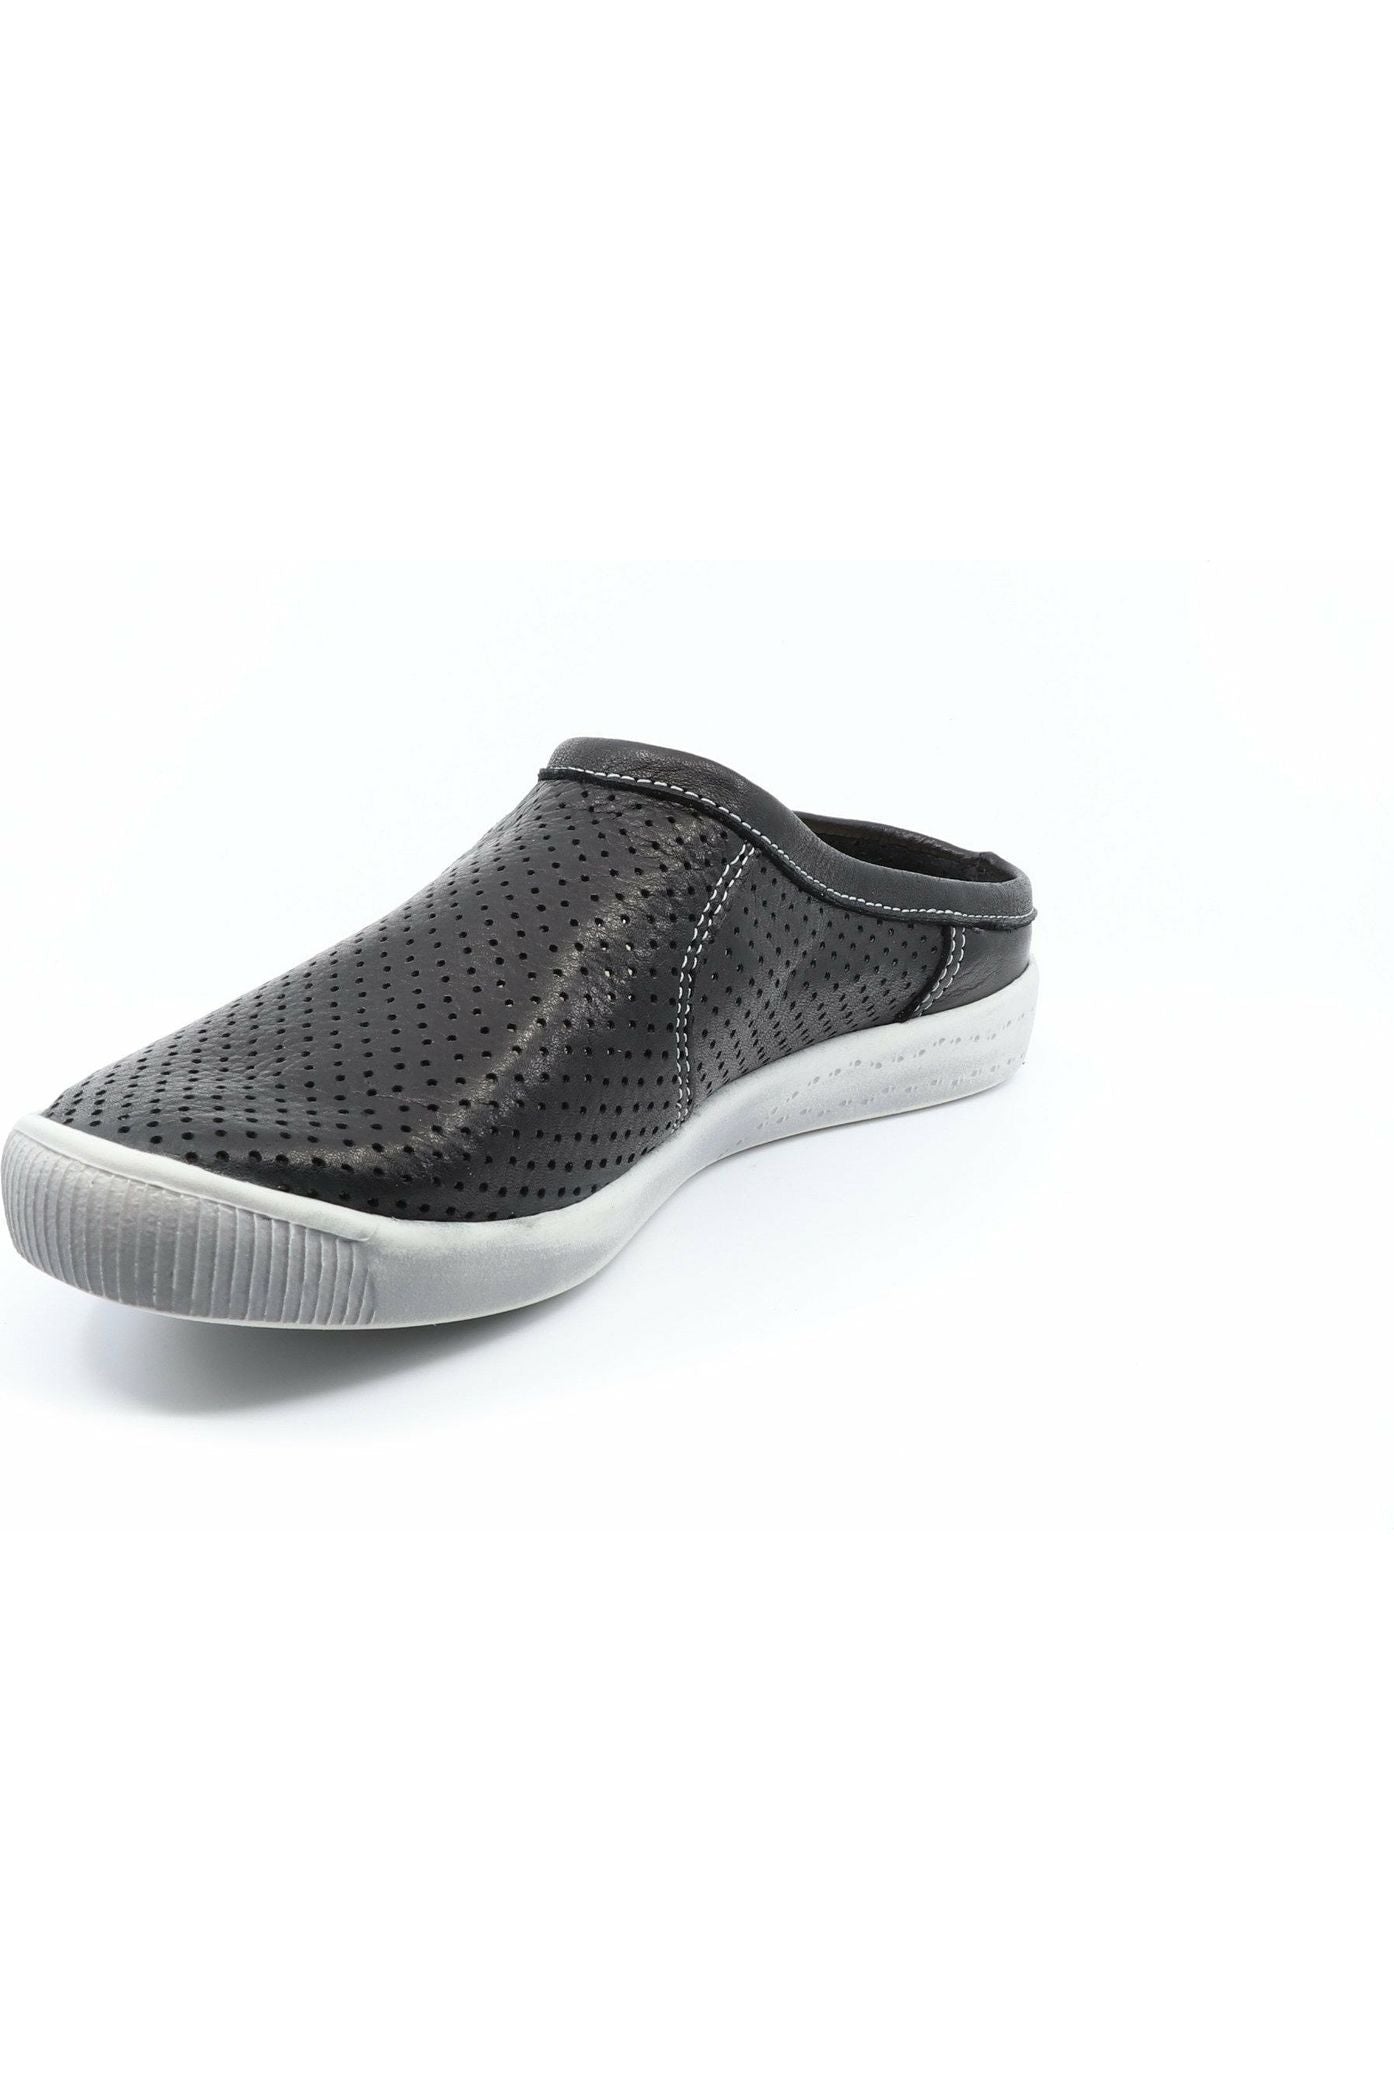 Softinos by Fly London Sneaker Mule - Style Ima, front inside angle